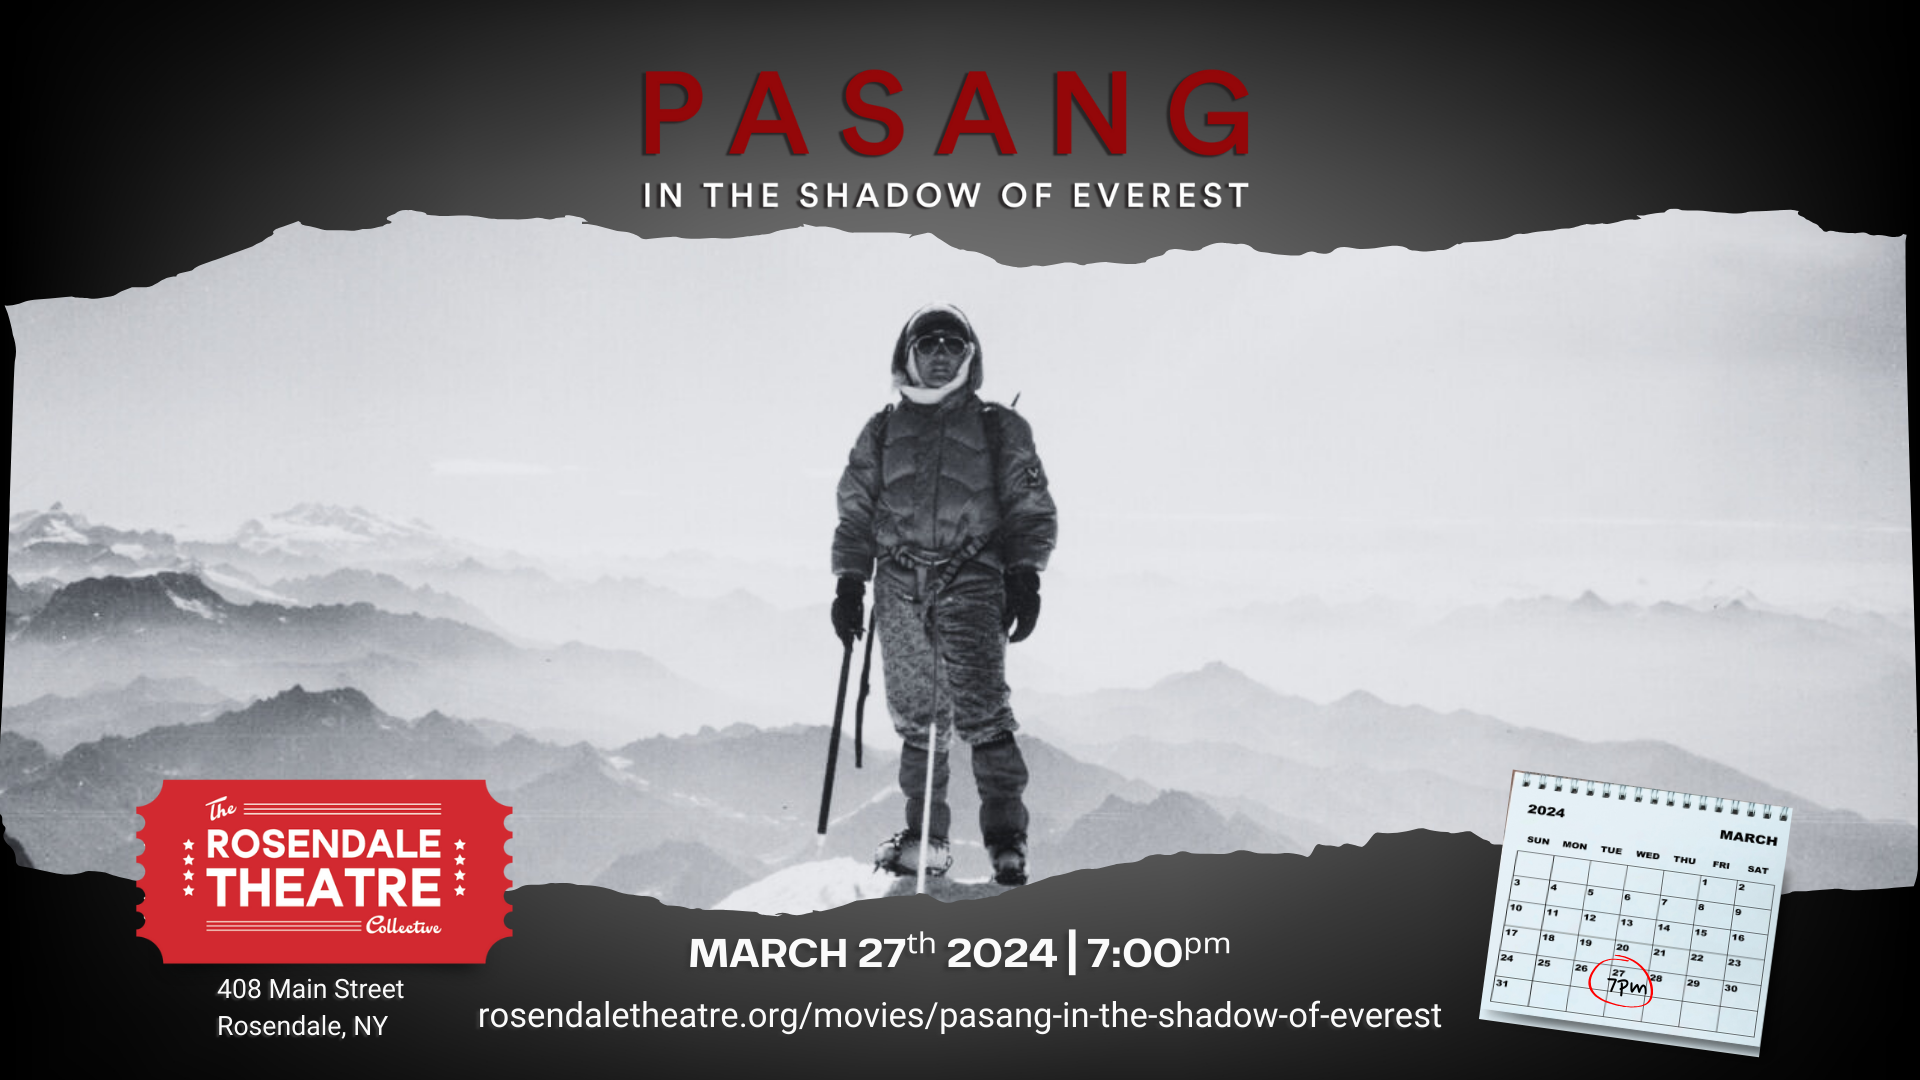 PASANG: In the Shadow of Everest screens at The Rosendale Theatre - NY March 27th @7pm